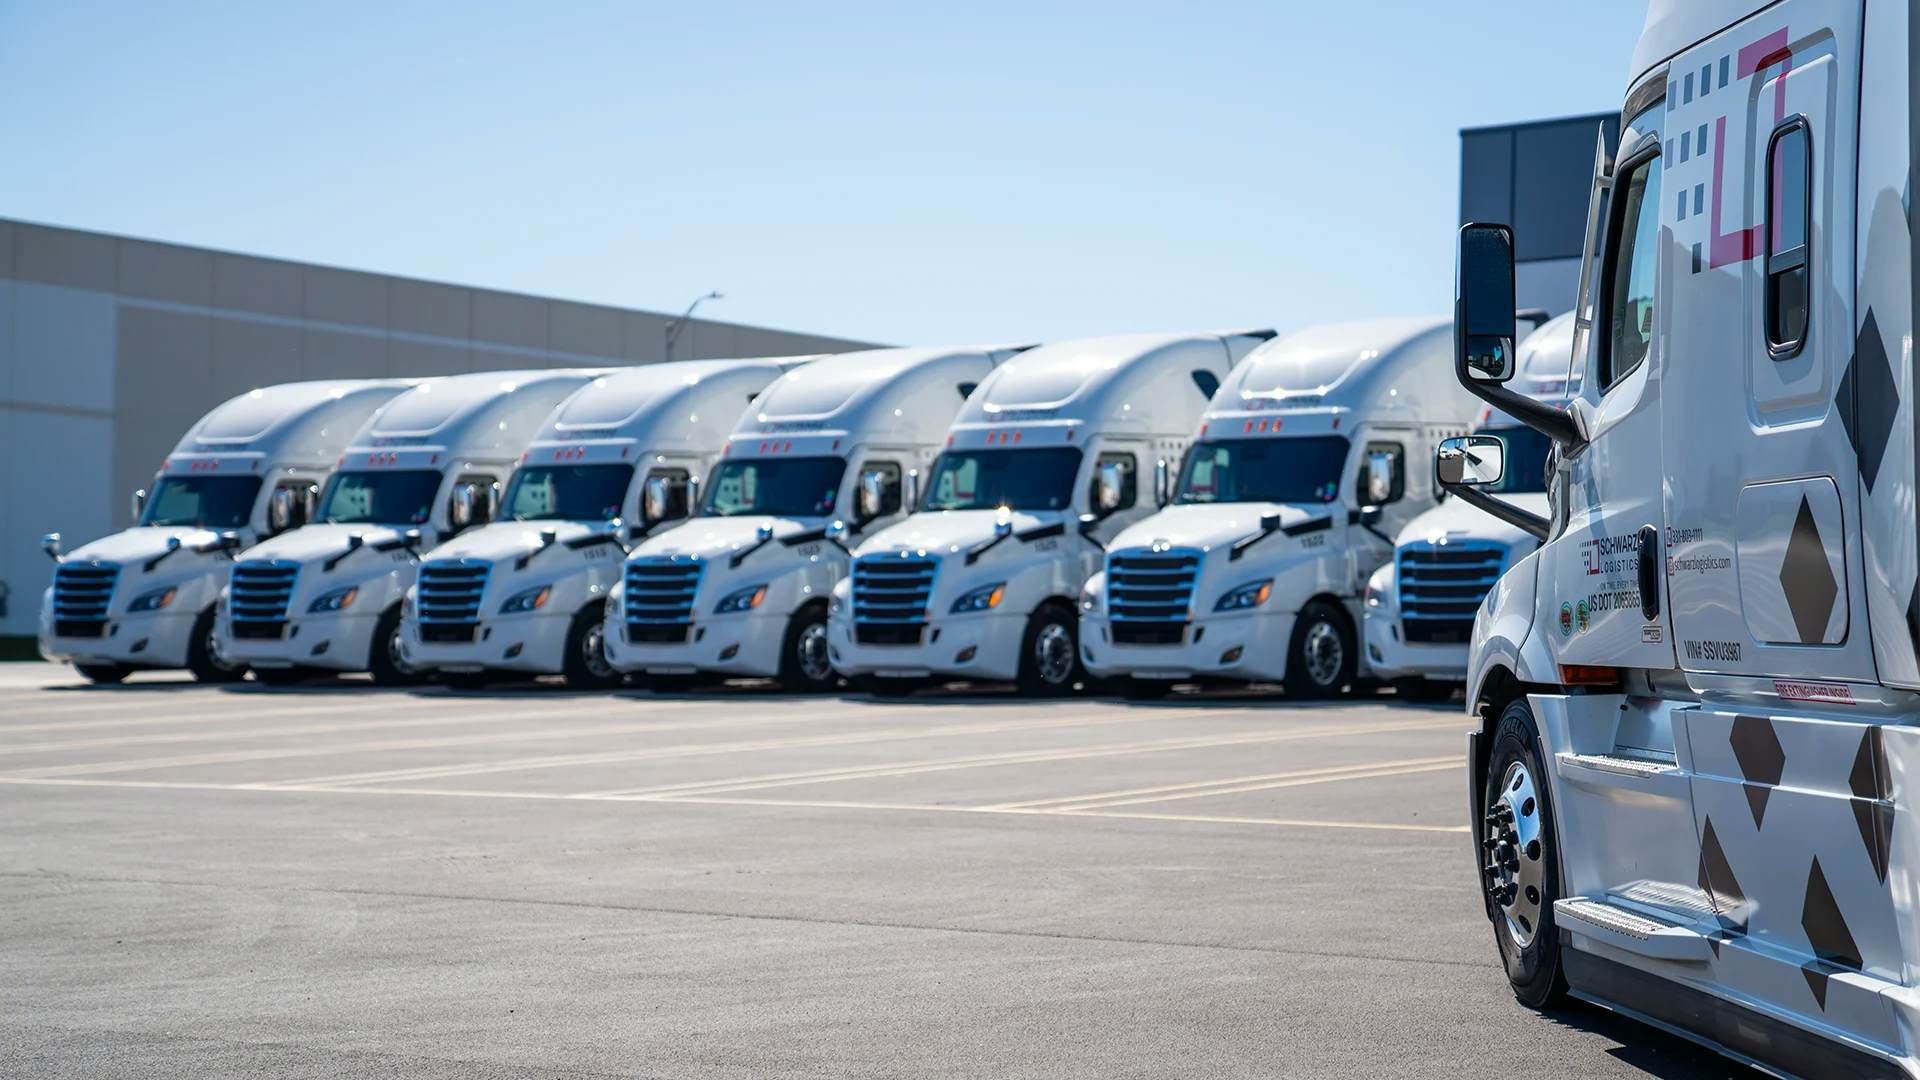 Schwarz Logistics fleet of modern white semi-trucks with aerodynamic cabs lined up neatly in a parking area.